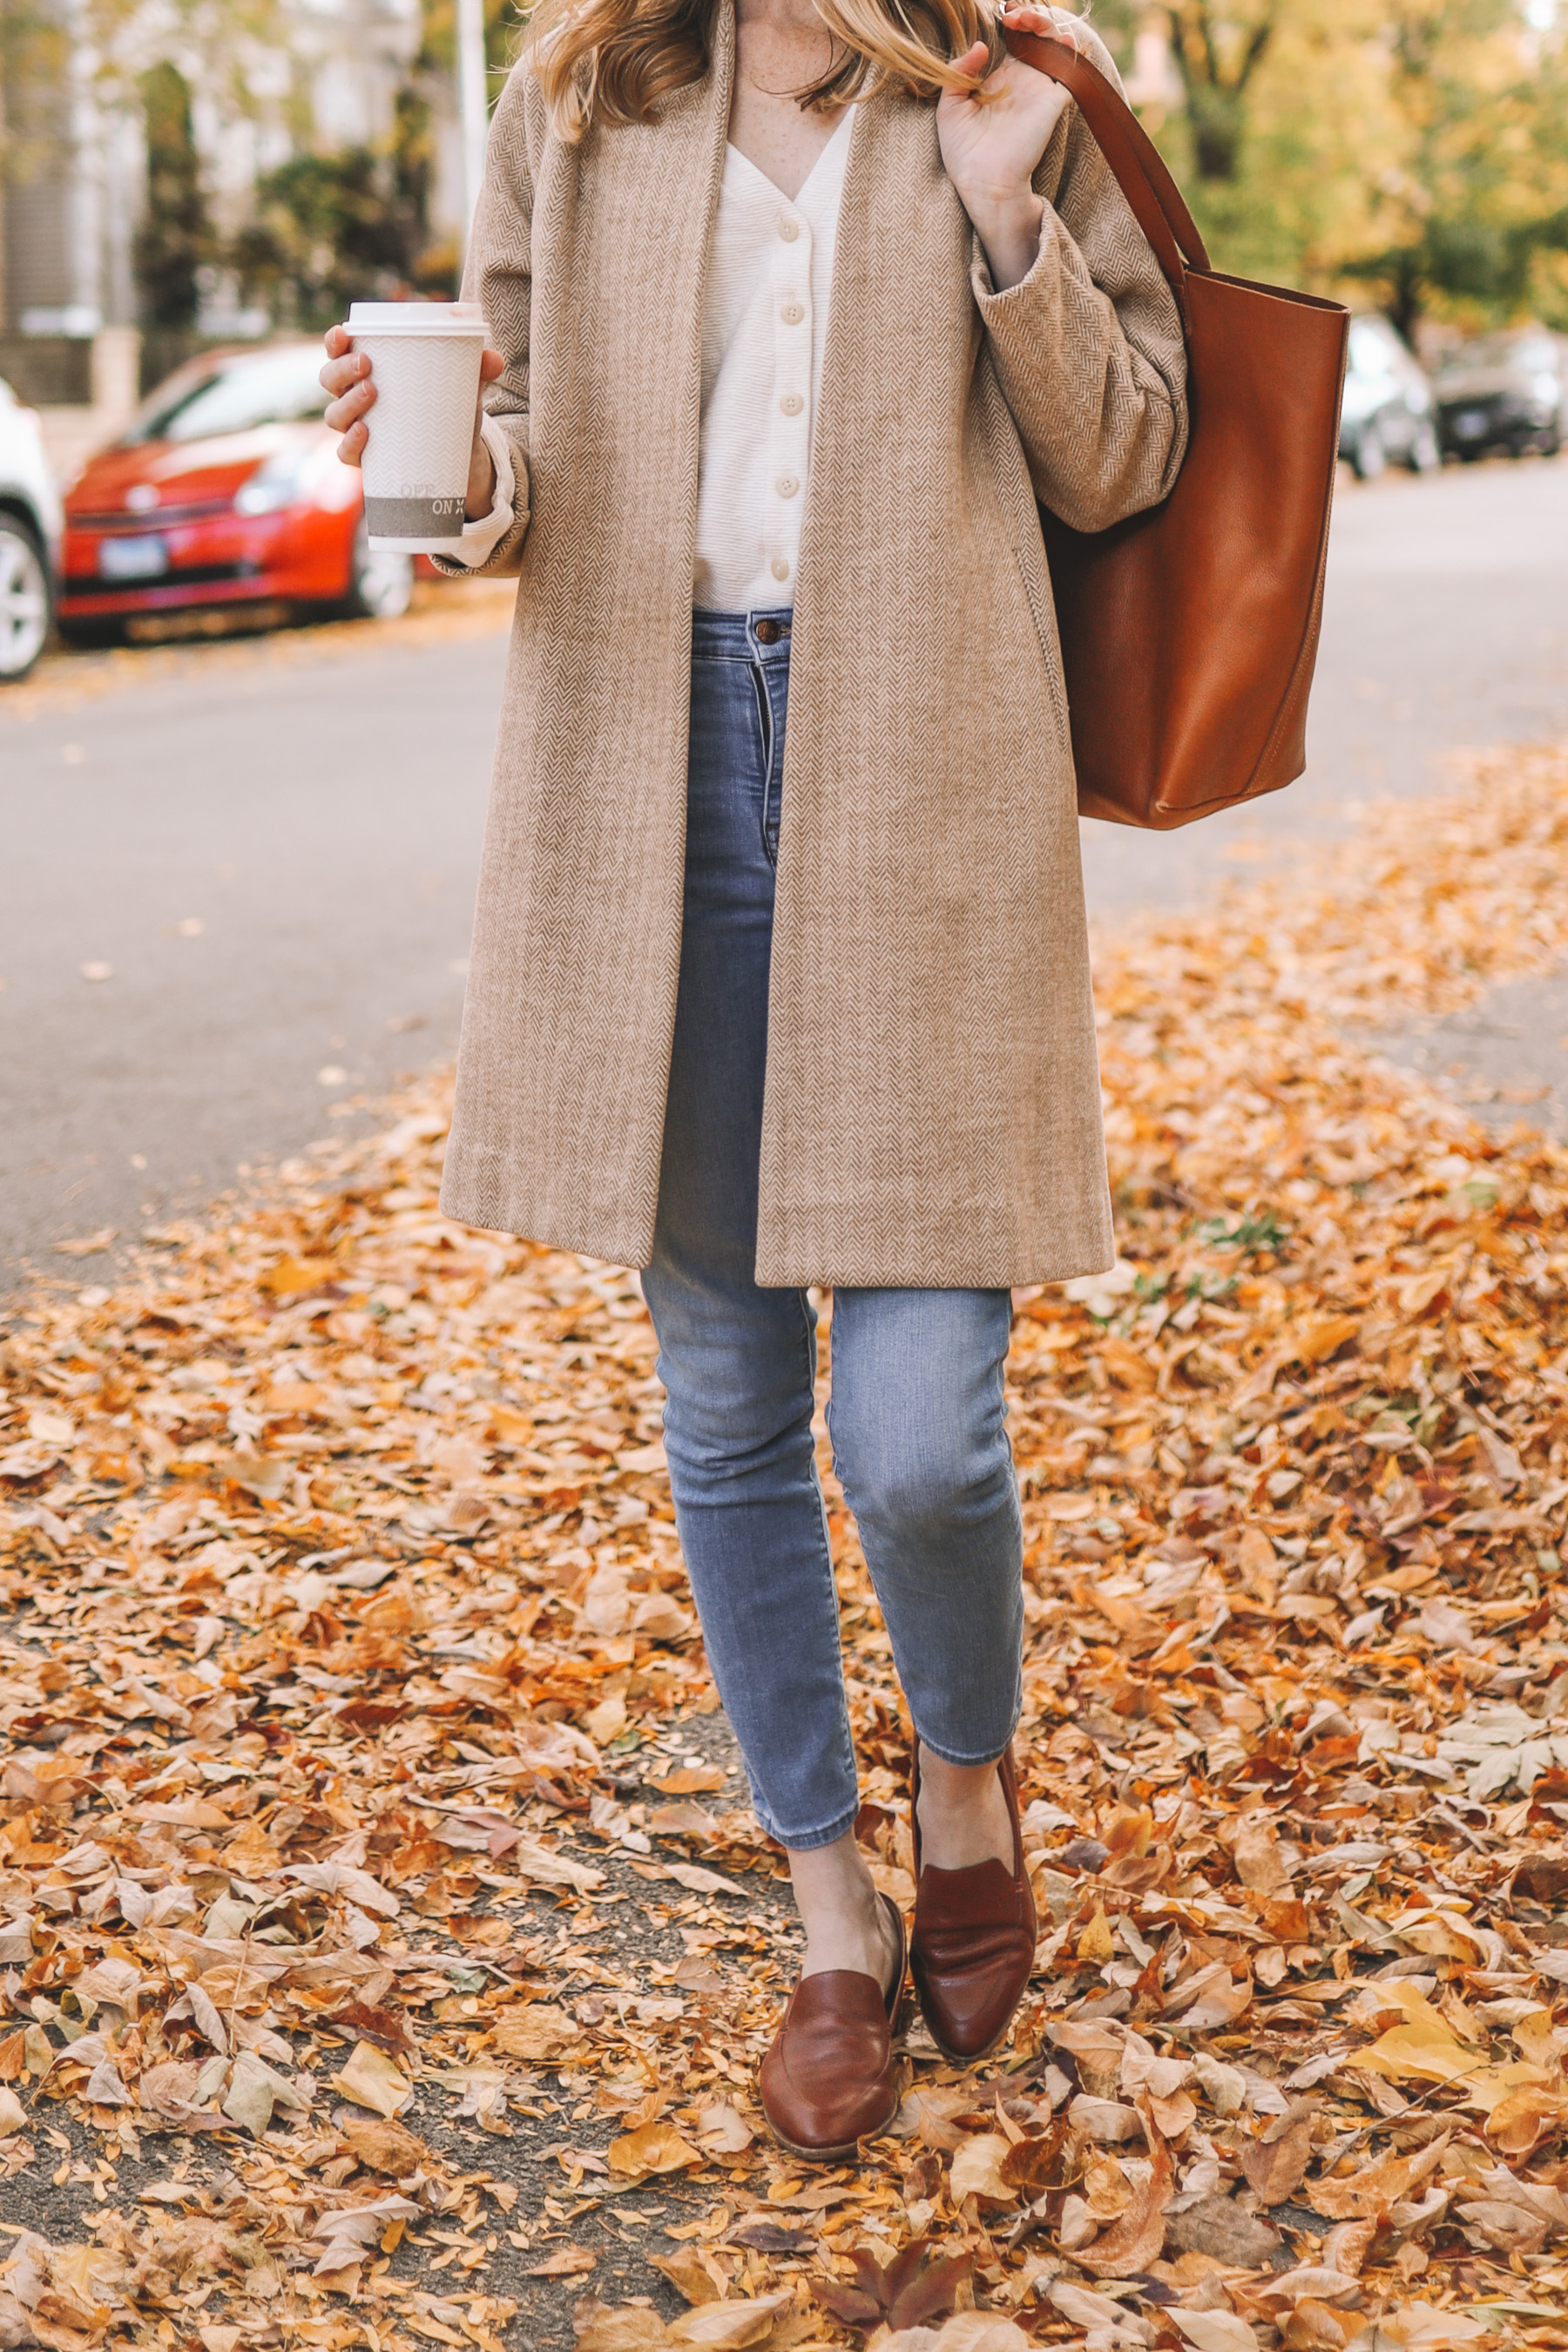 Madewell Sale: The Best Of - Kelly in the City | Lifestyle Blog